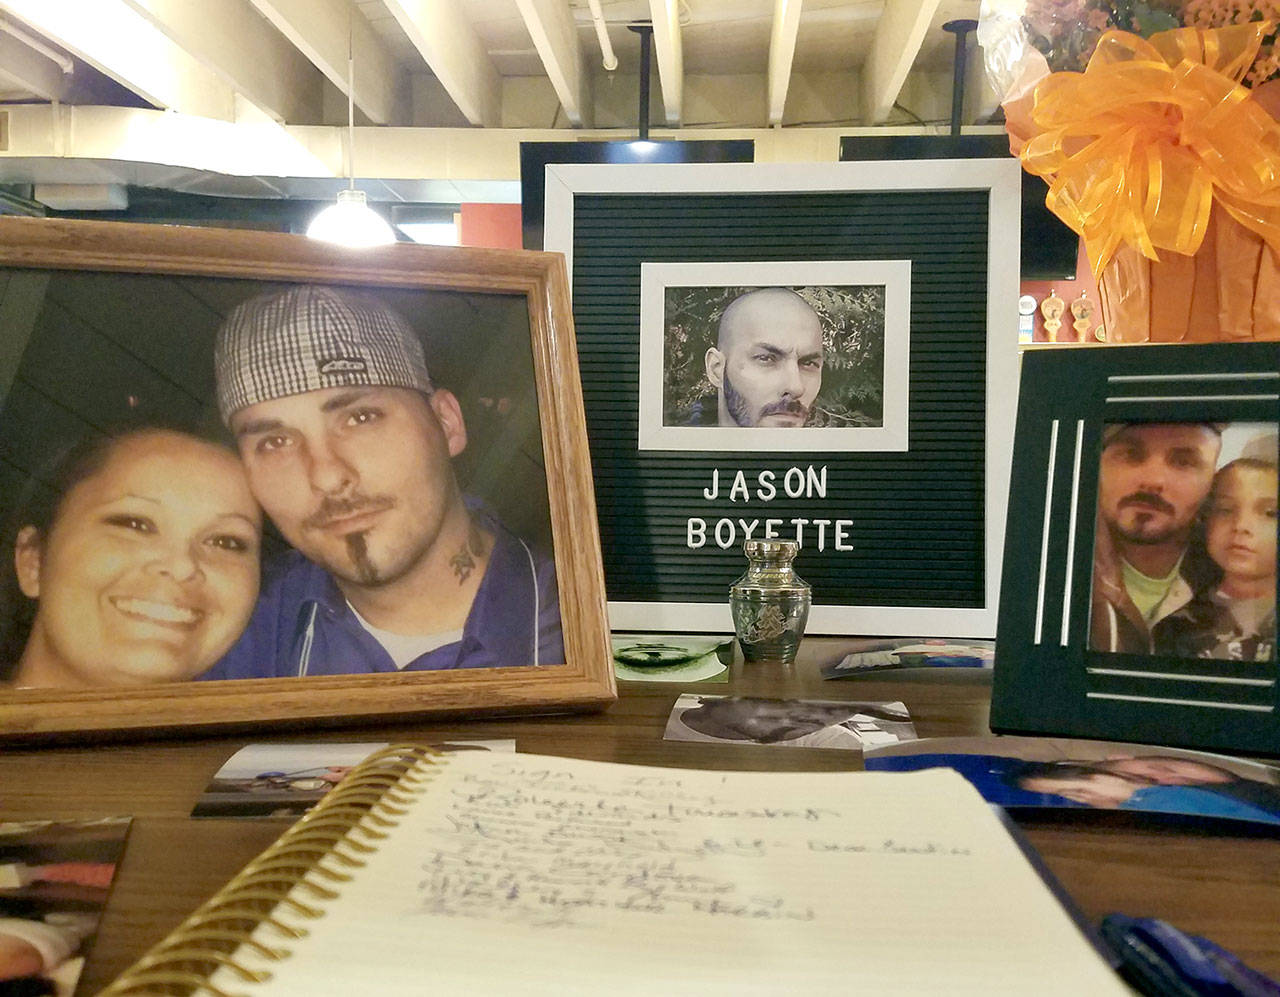 Framed photos and an urn filled with ashes are displayed inside The Tin Brick during a wake for chef Jason Boyette on Sept. 21 in downtown Port Townsend. At left is Boyette with his partner of 16 years, Amanda Timentwa, and at right is Boyette with his son Elias, 5. (Nicholas Johnson/Peninsula Daily News)